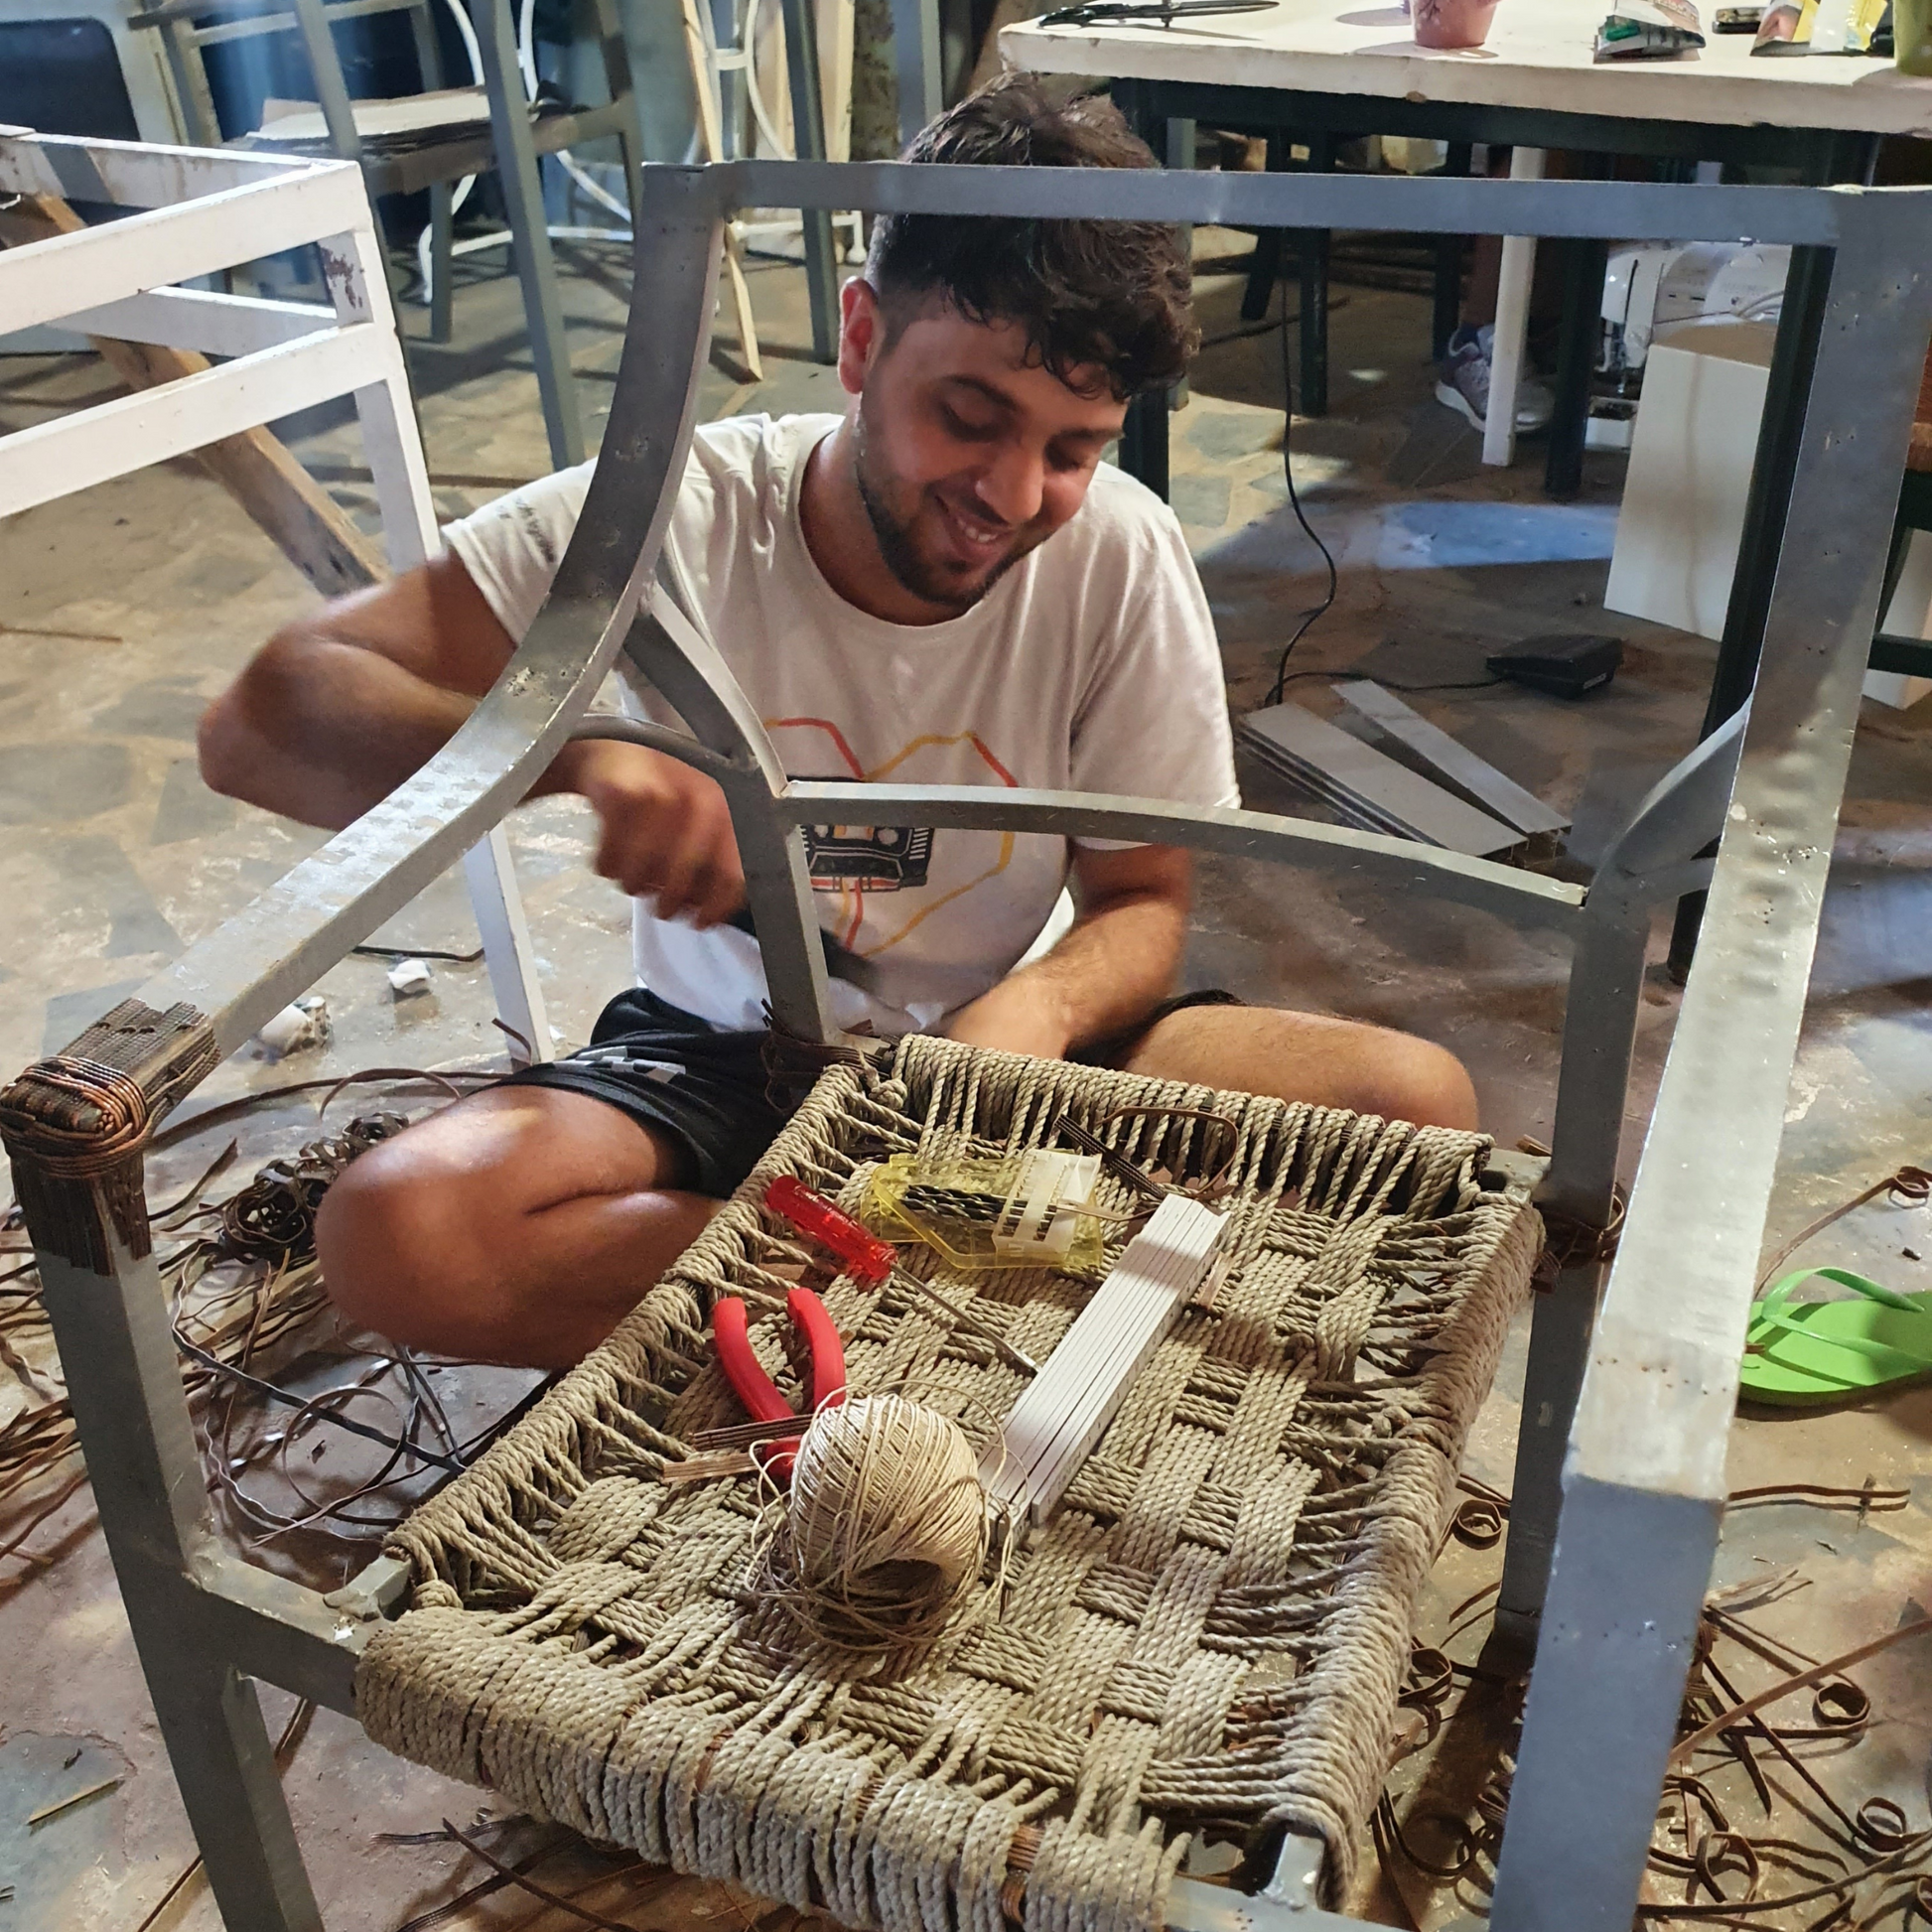 This photography was taken in a building and repair garage, showing a smiling refugee with wavy hair and a beard repairing a wooden chair that has a rope seat. In the background there are partial views of a desk with tools on it, a wooden bed and a wooden shelf. On the floor there are wooden scraps from the work done.